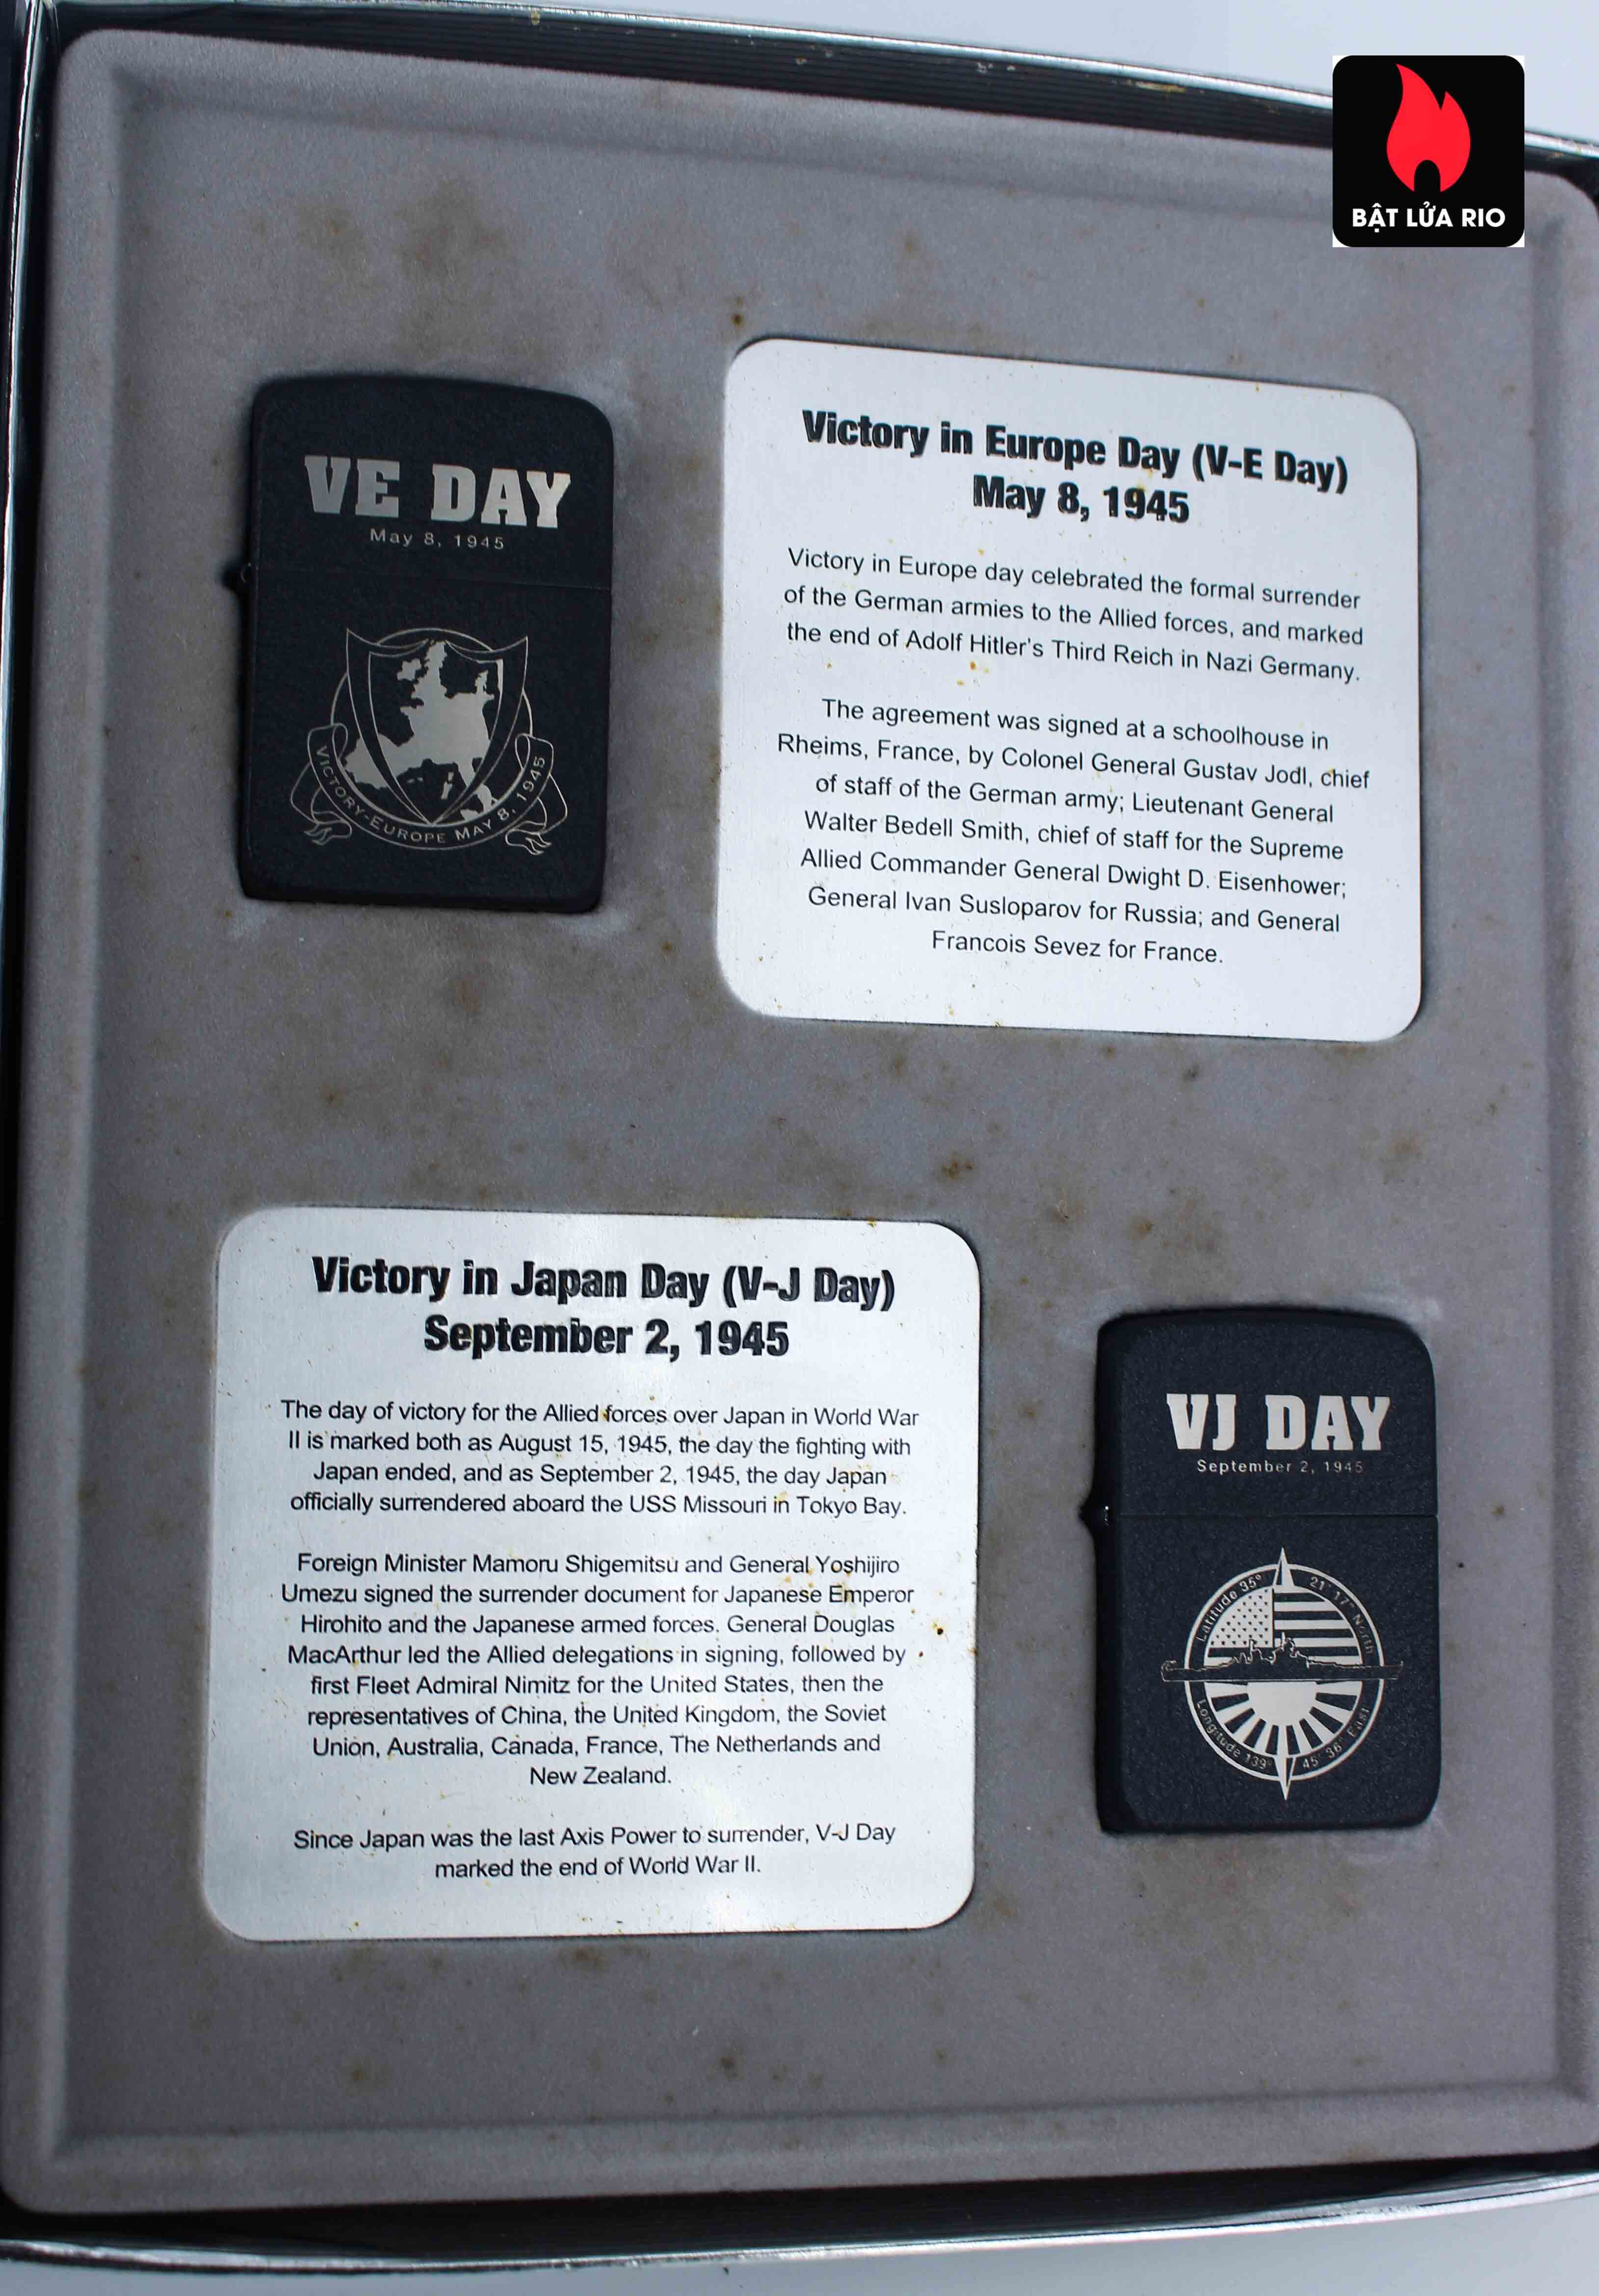 Zippo 2005 - WWII VE DAY & VJ DAY - Victory in Europe & Japan 3